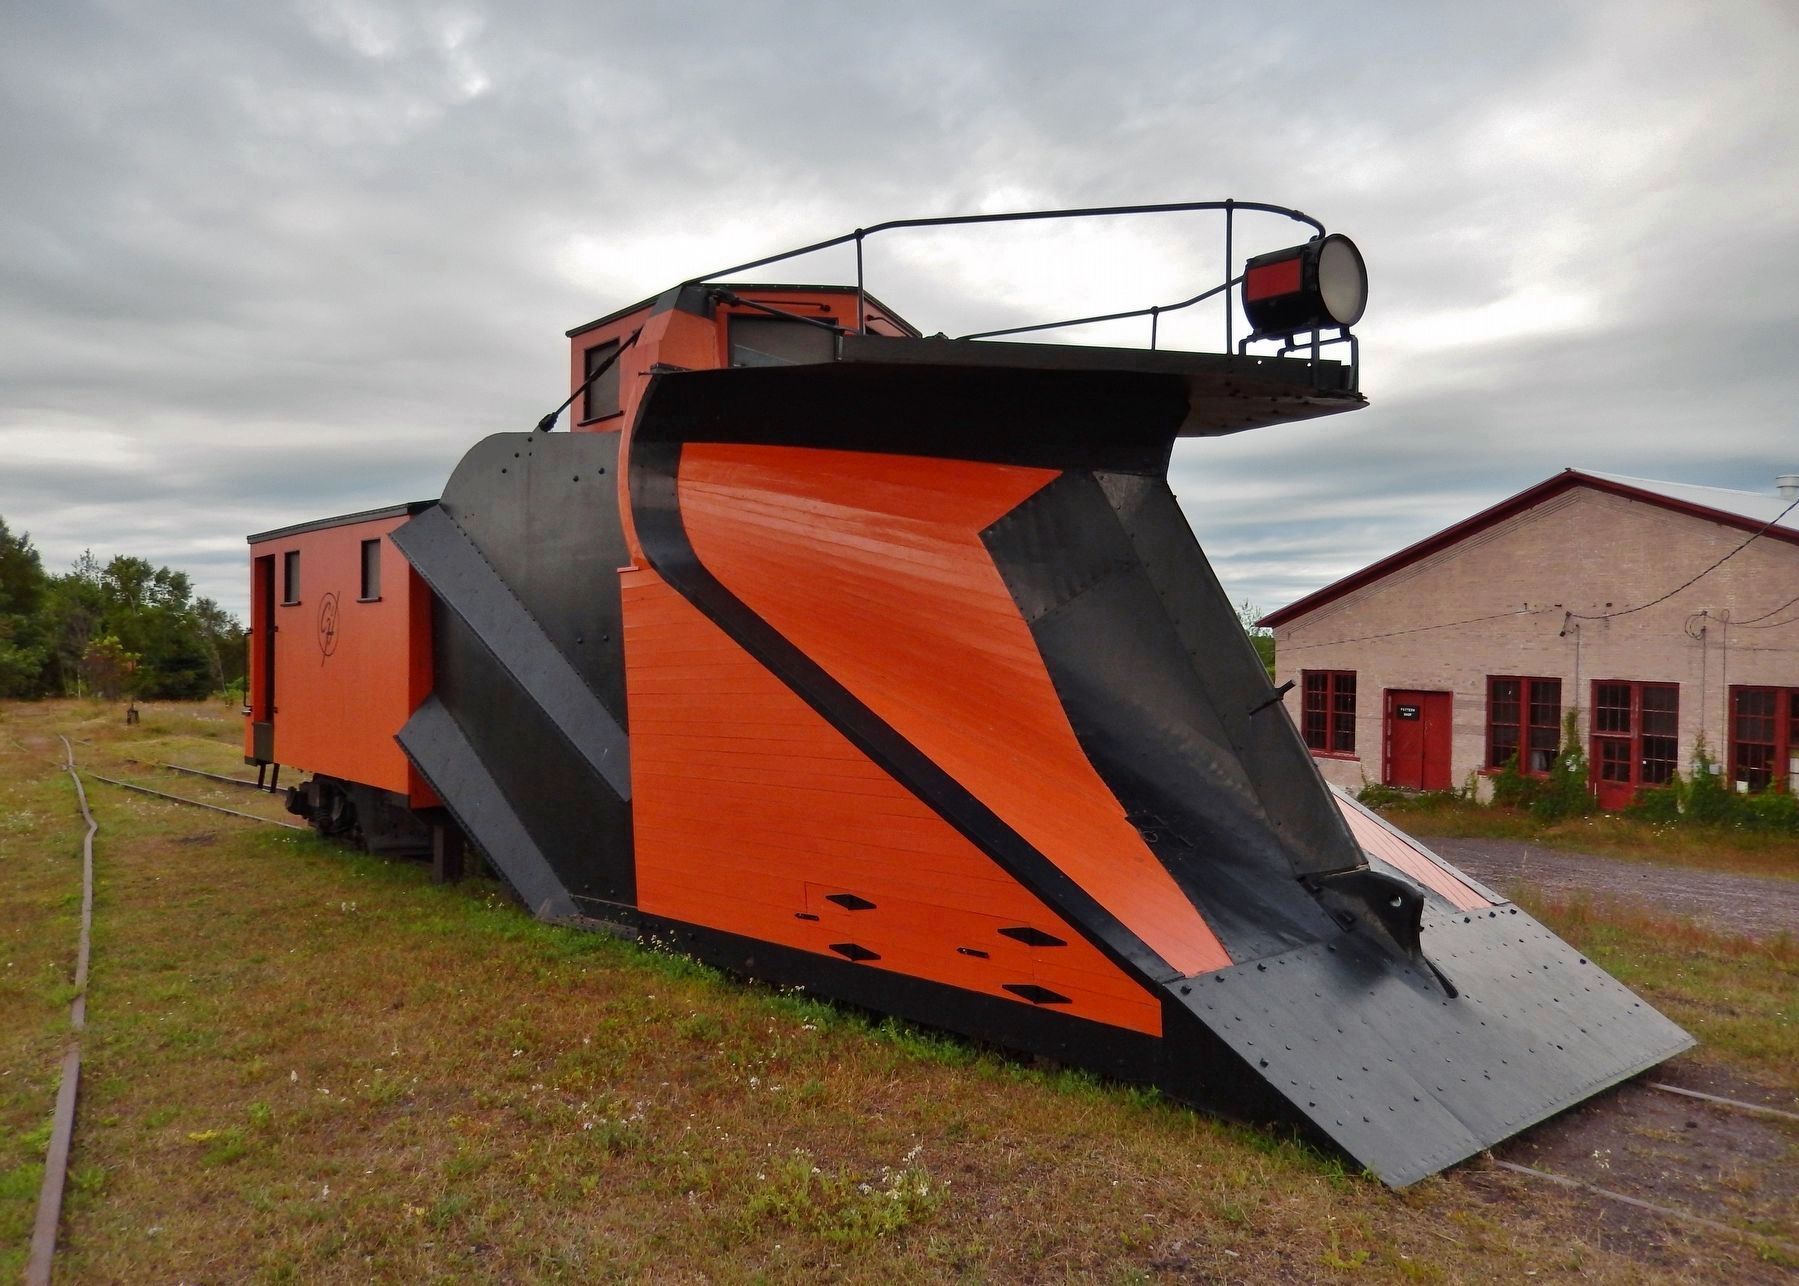 Russell Snowplow (<i>front / "tongue" view; adjustable "wings" visible behind the tongue</i>) image. Click for full size.